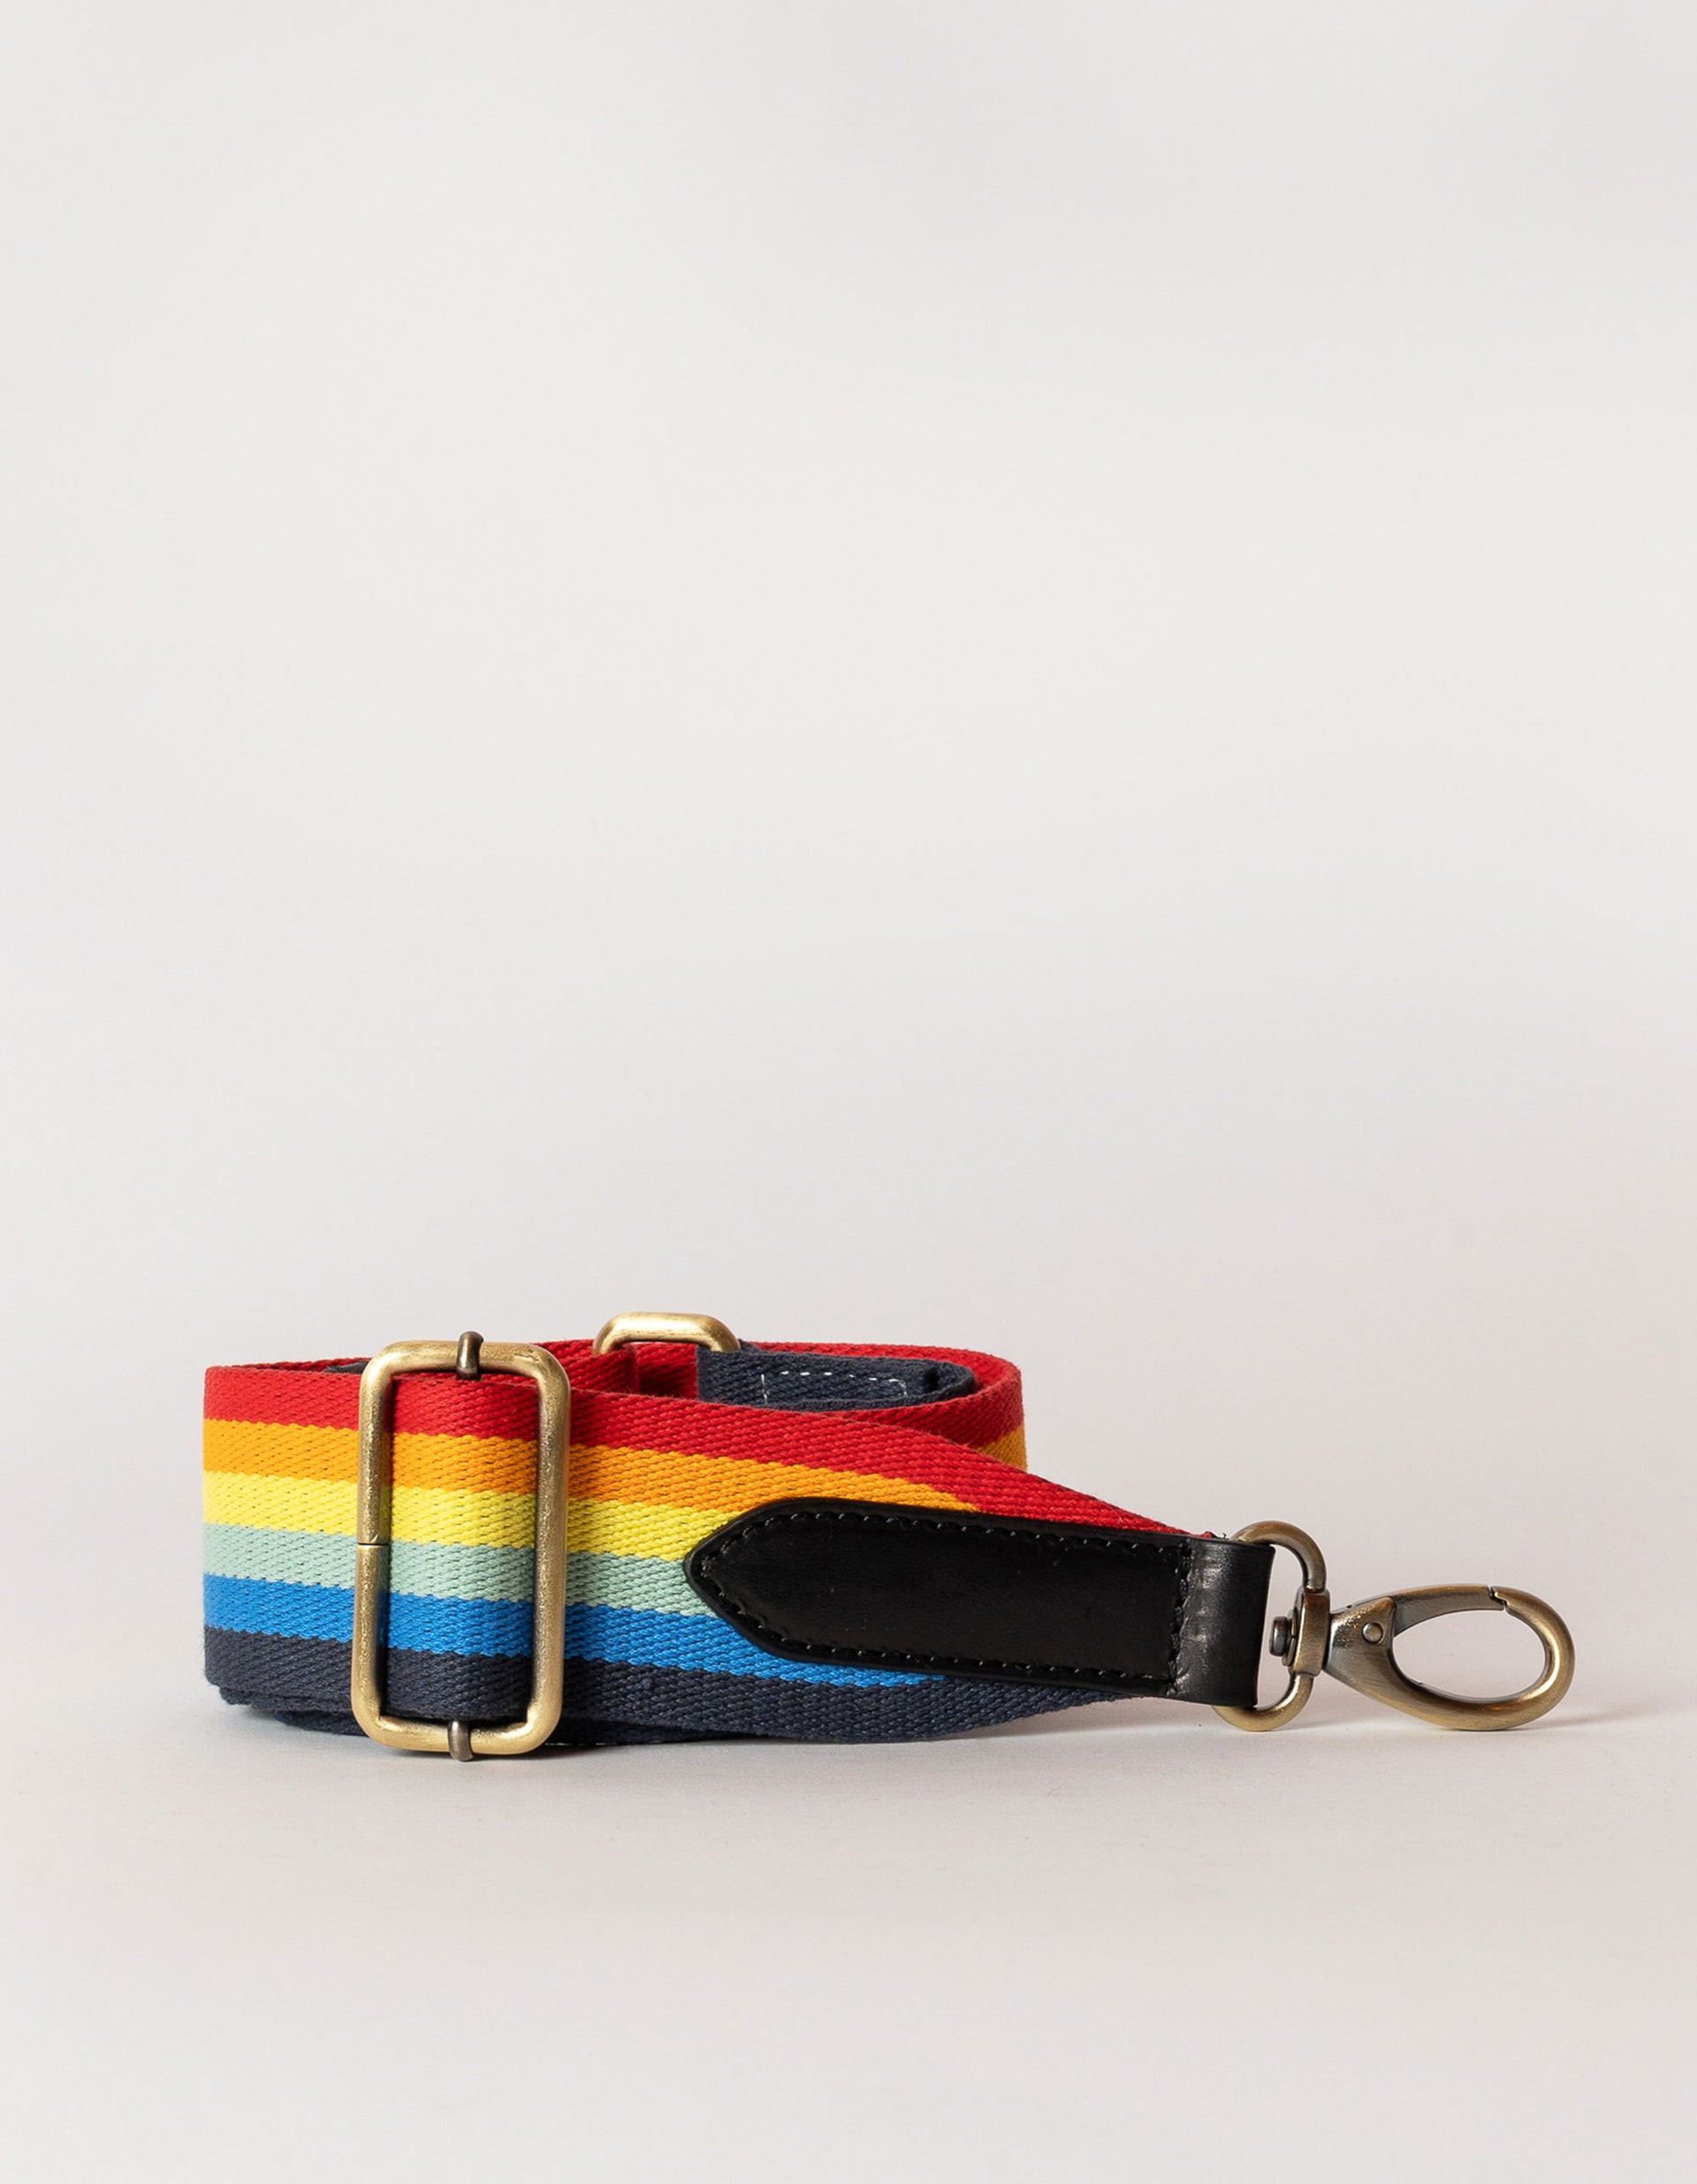 Rainbow webbing strap with black classic leather details.